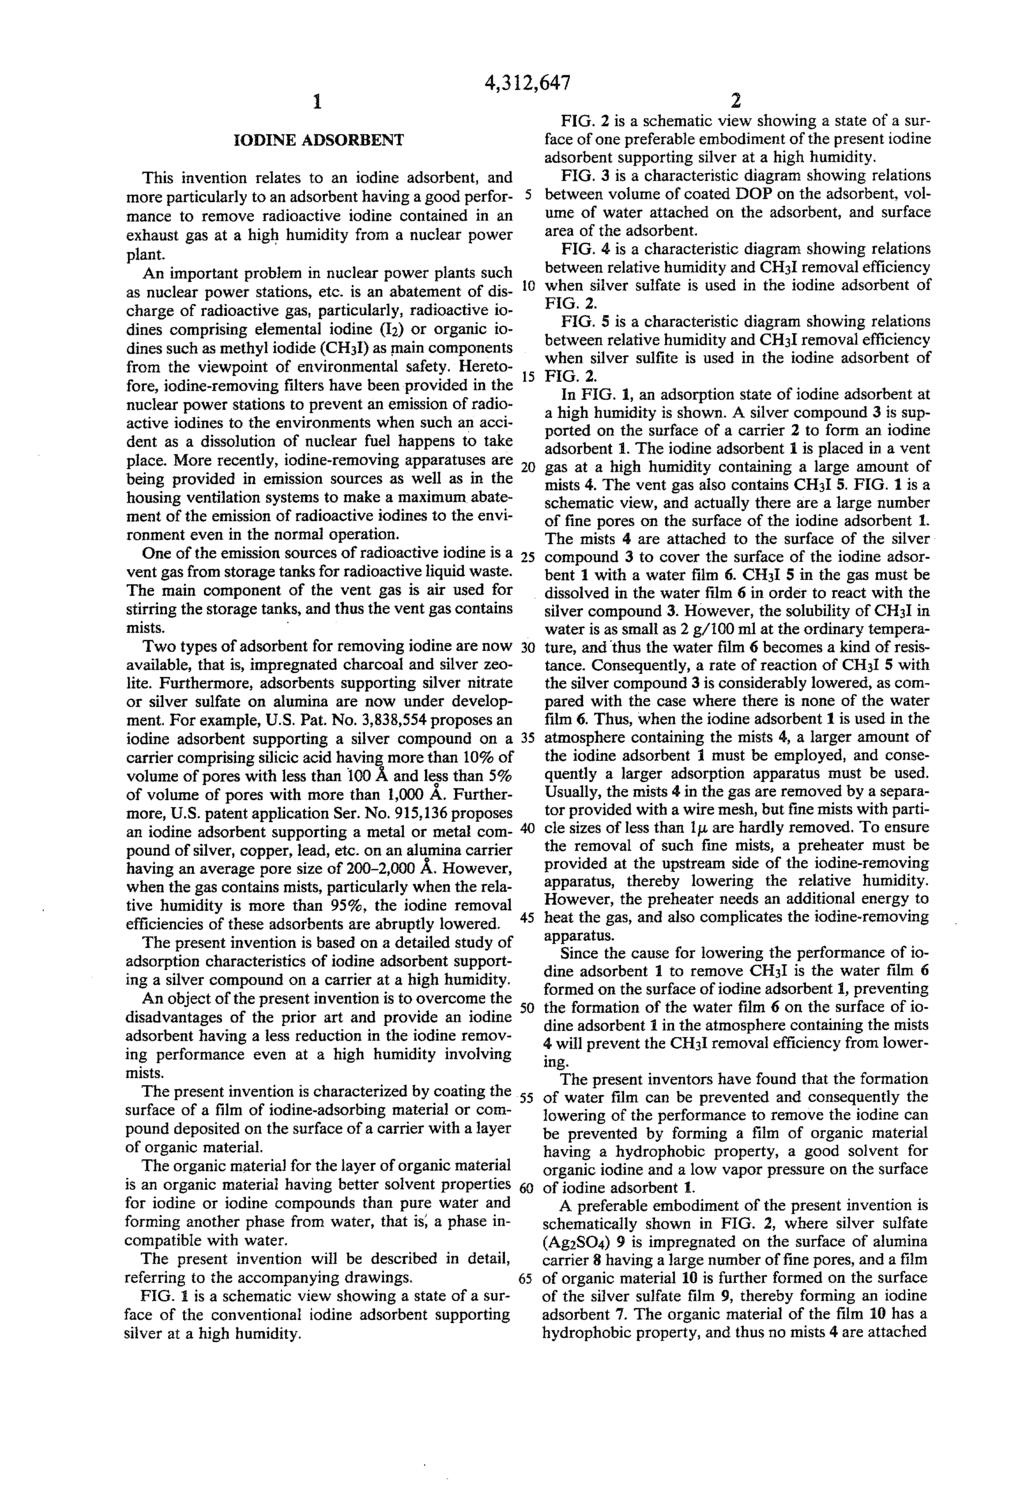 ODINE ADSORBENT This invention relates to an iodine adsorbent, and more particularly to an adsorbent having a good perfor mance to remove radioactive iodine contained in an exhaust gas at a high